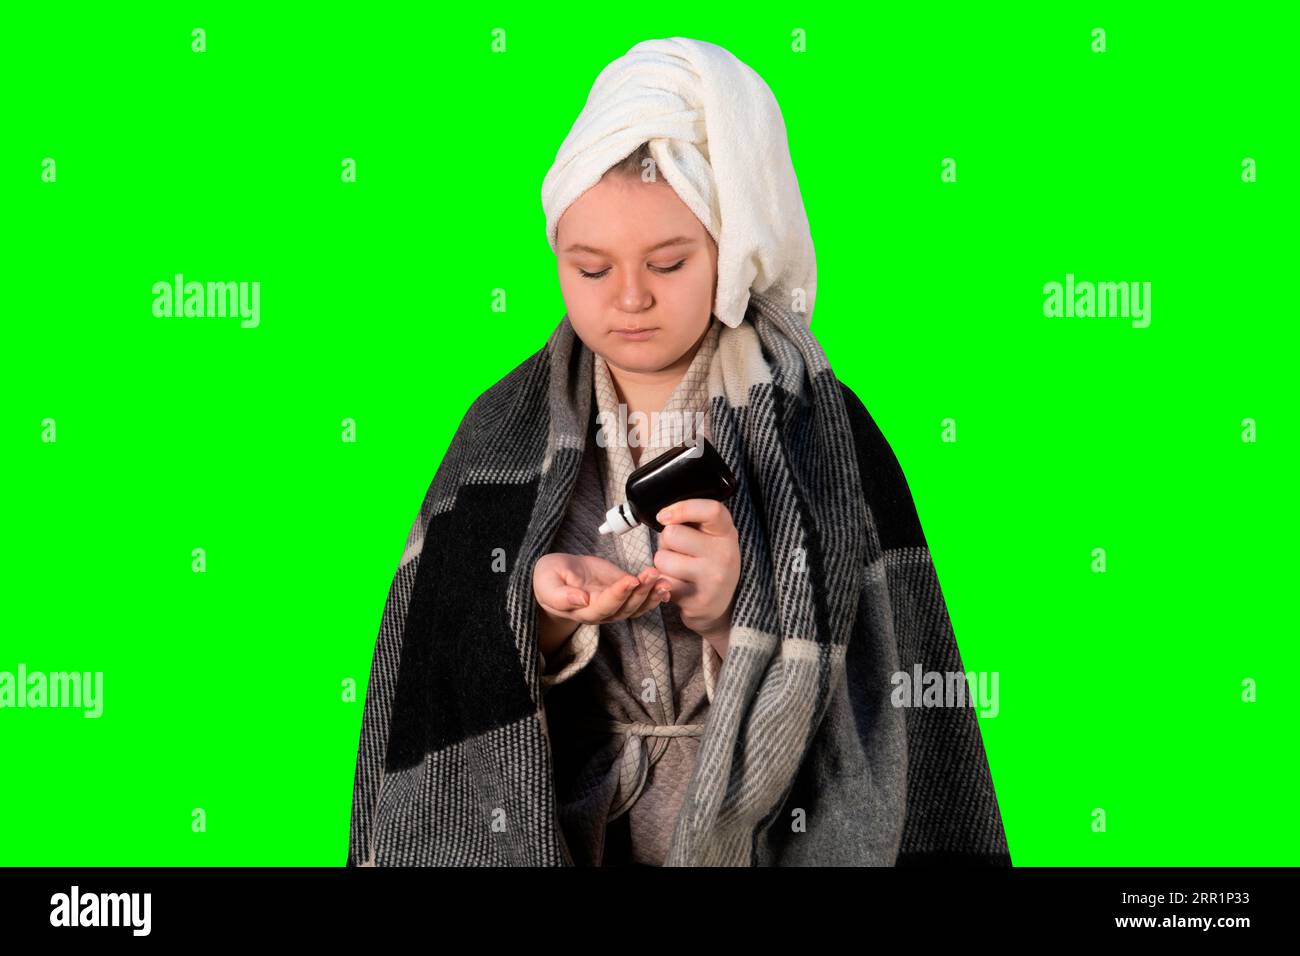 Girl with cold symptoms pours a disinfectant from a bottle onto her hand on a green background (chroma key). Concept of healthcare and home treatment Stock Photo